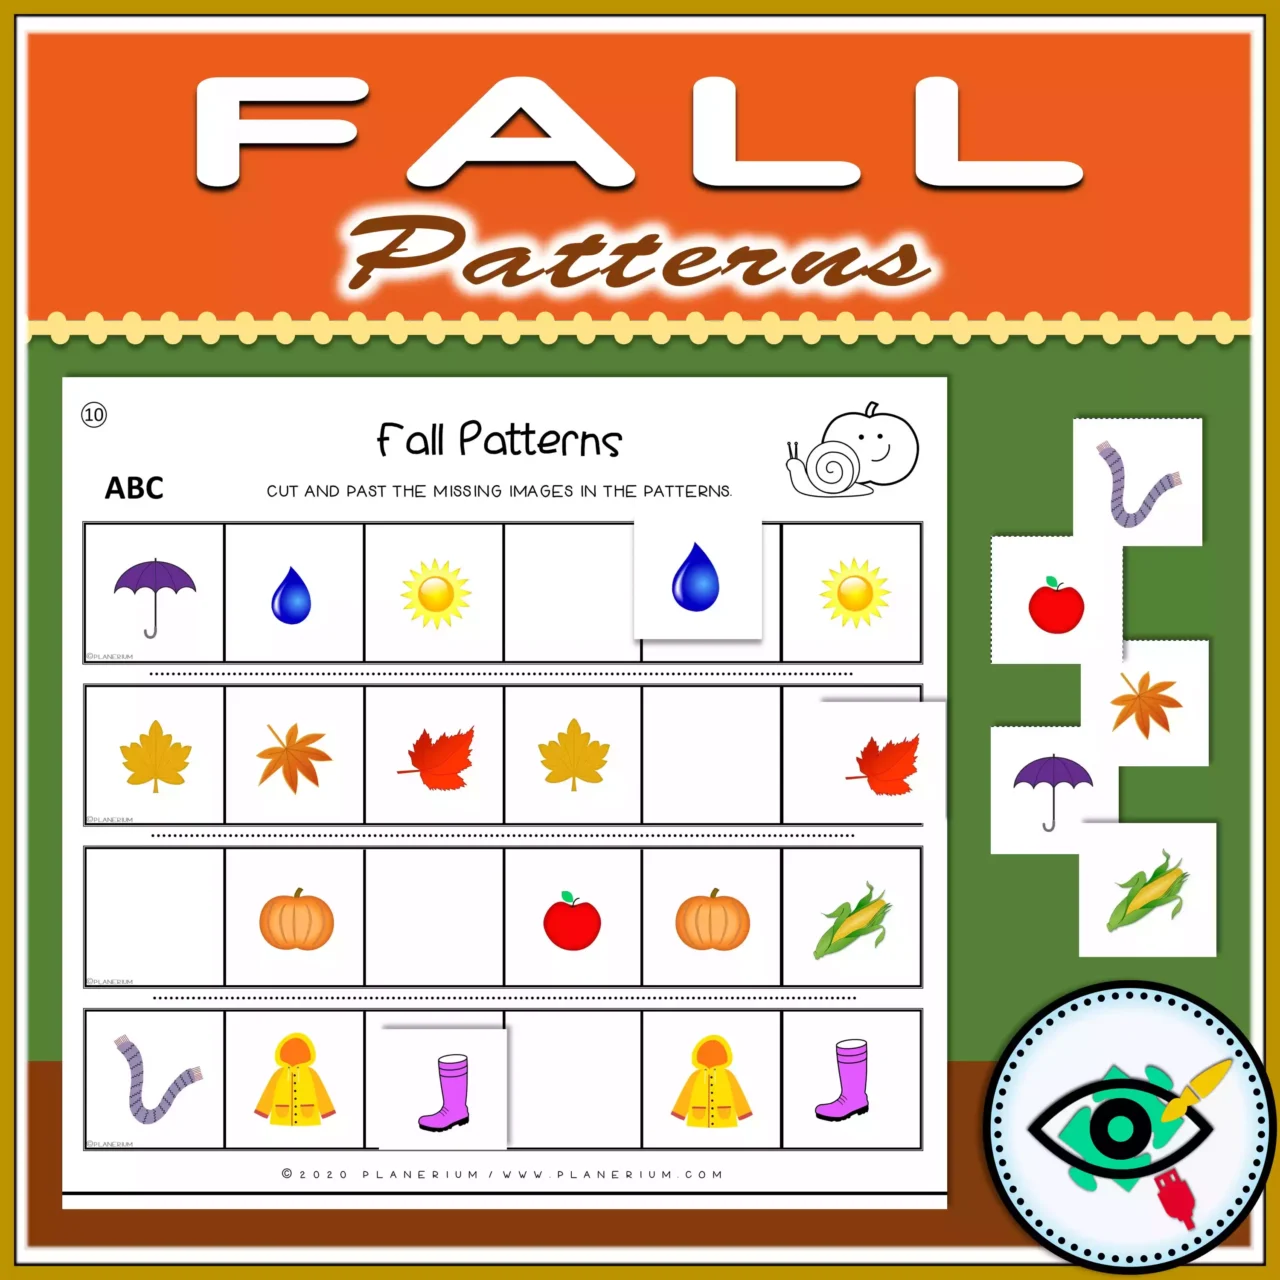 Fall - Patterns Activity - Image Title 7